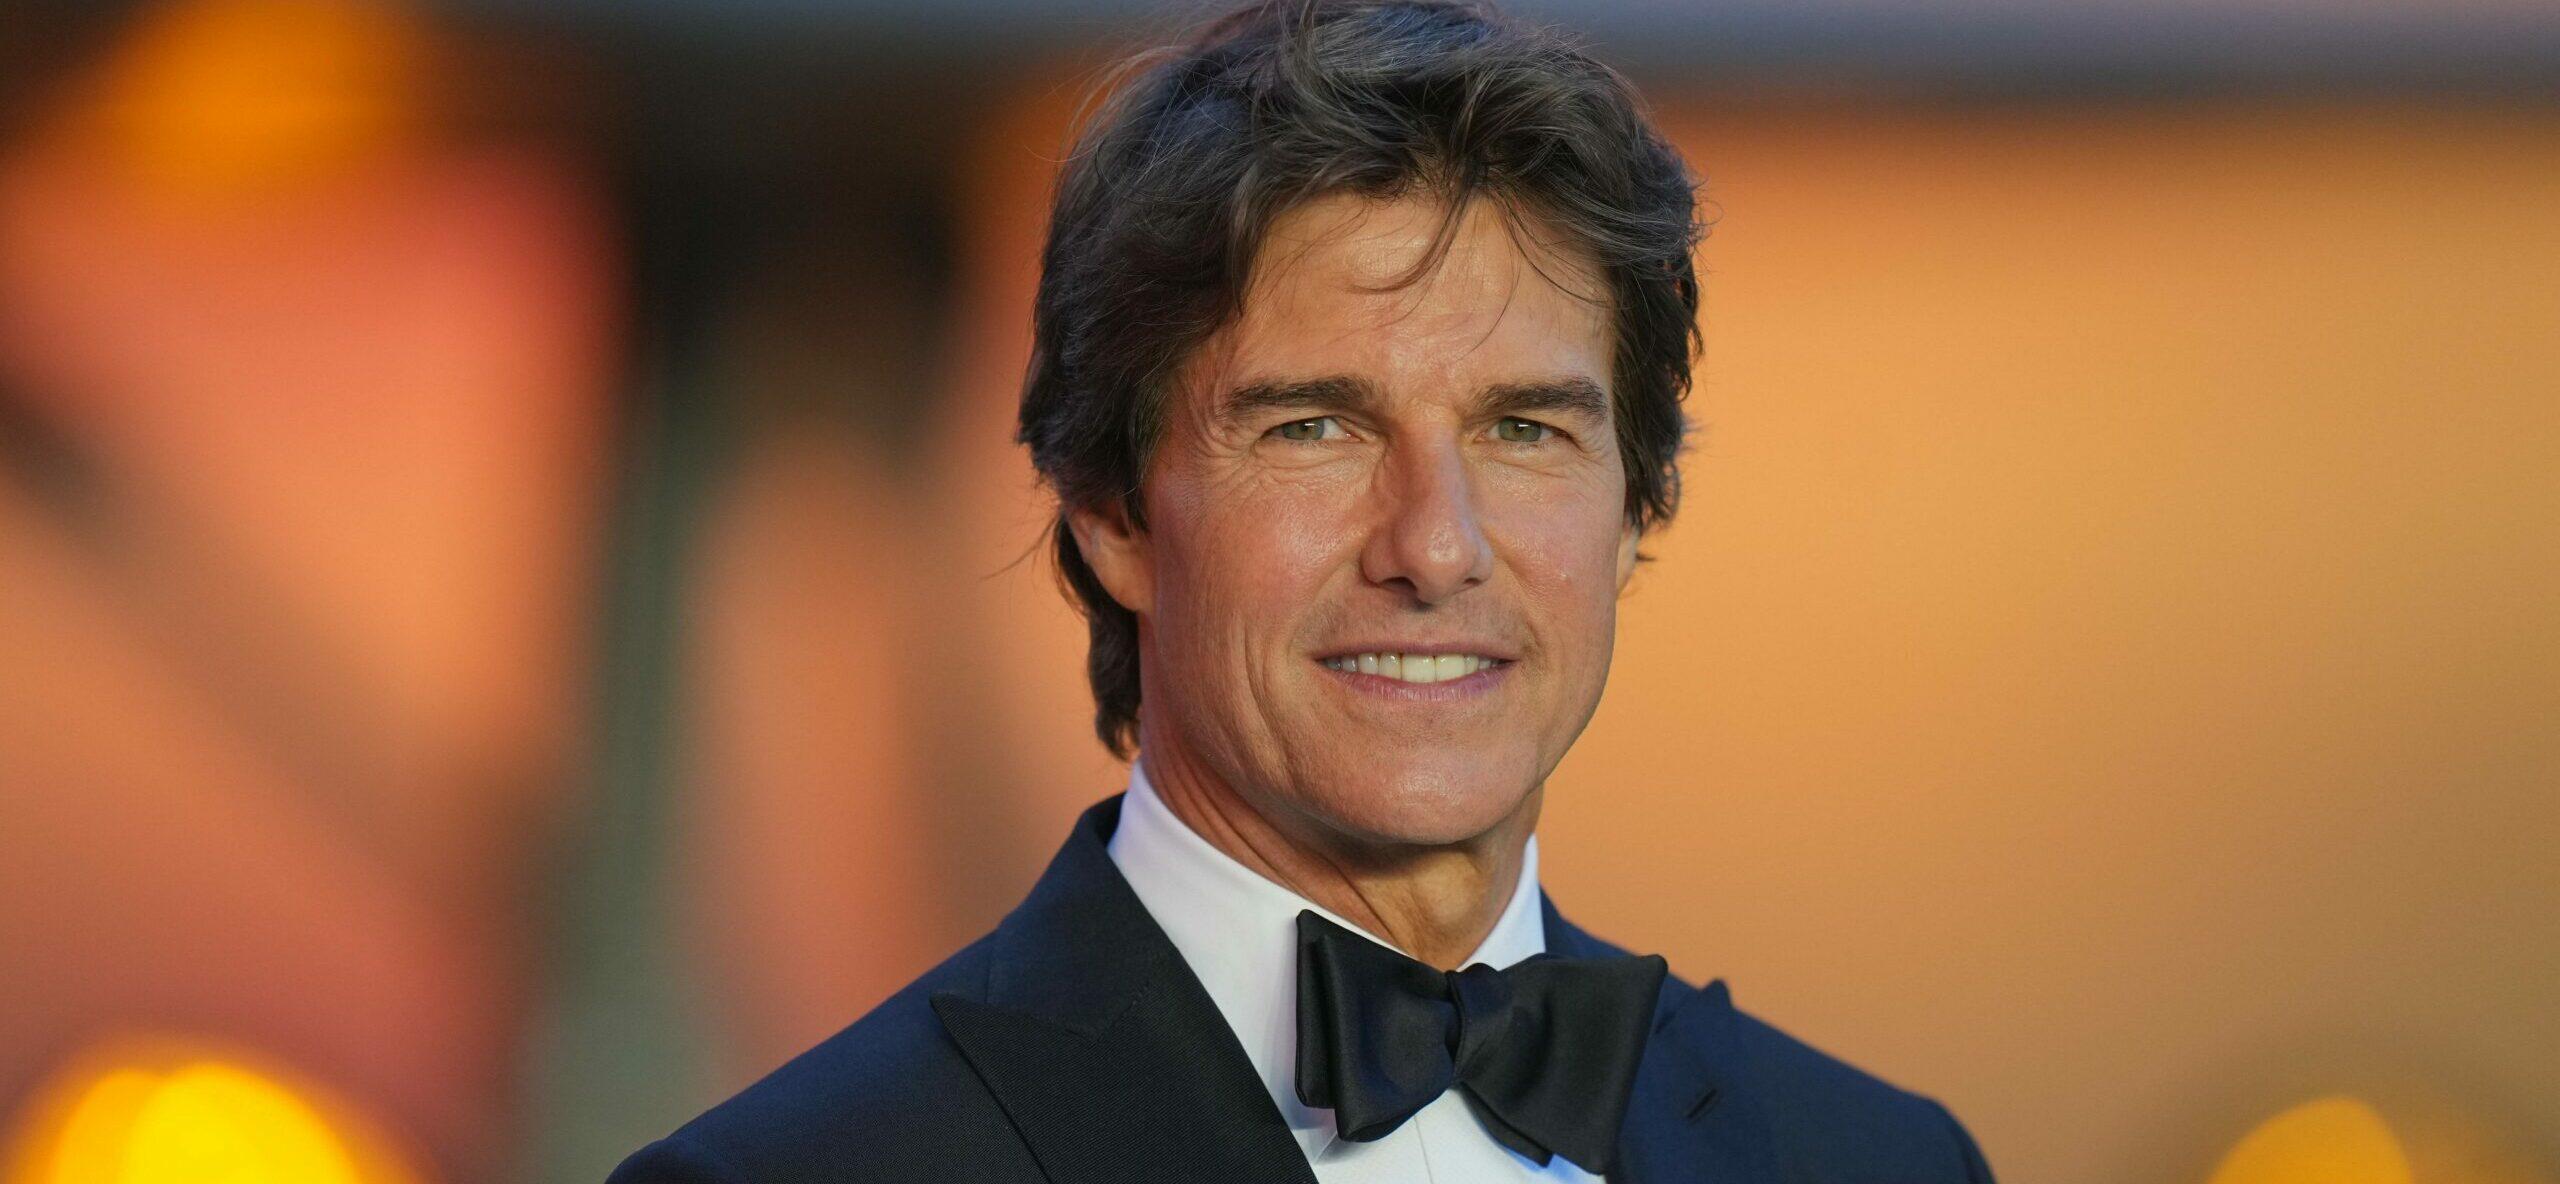 Tom Cruise Gives Exciting Update On $200 Million Outer Space Film Project